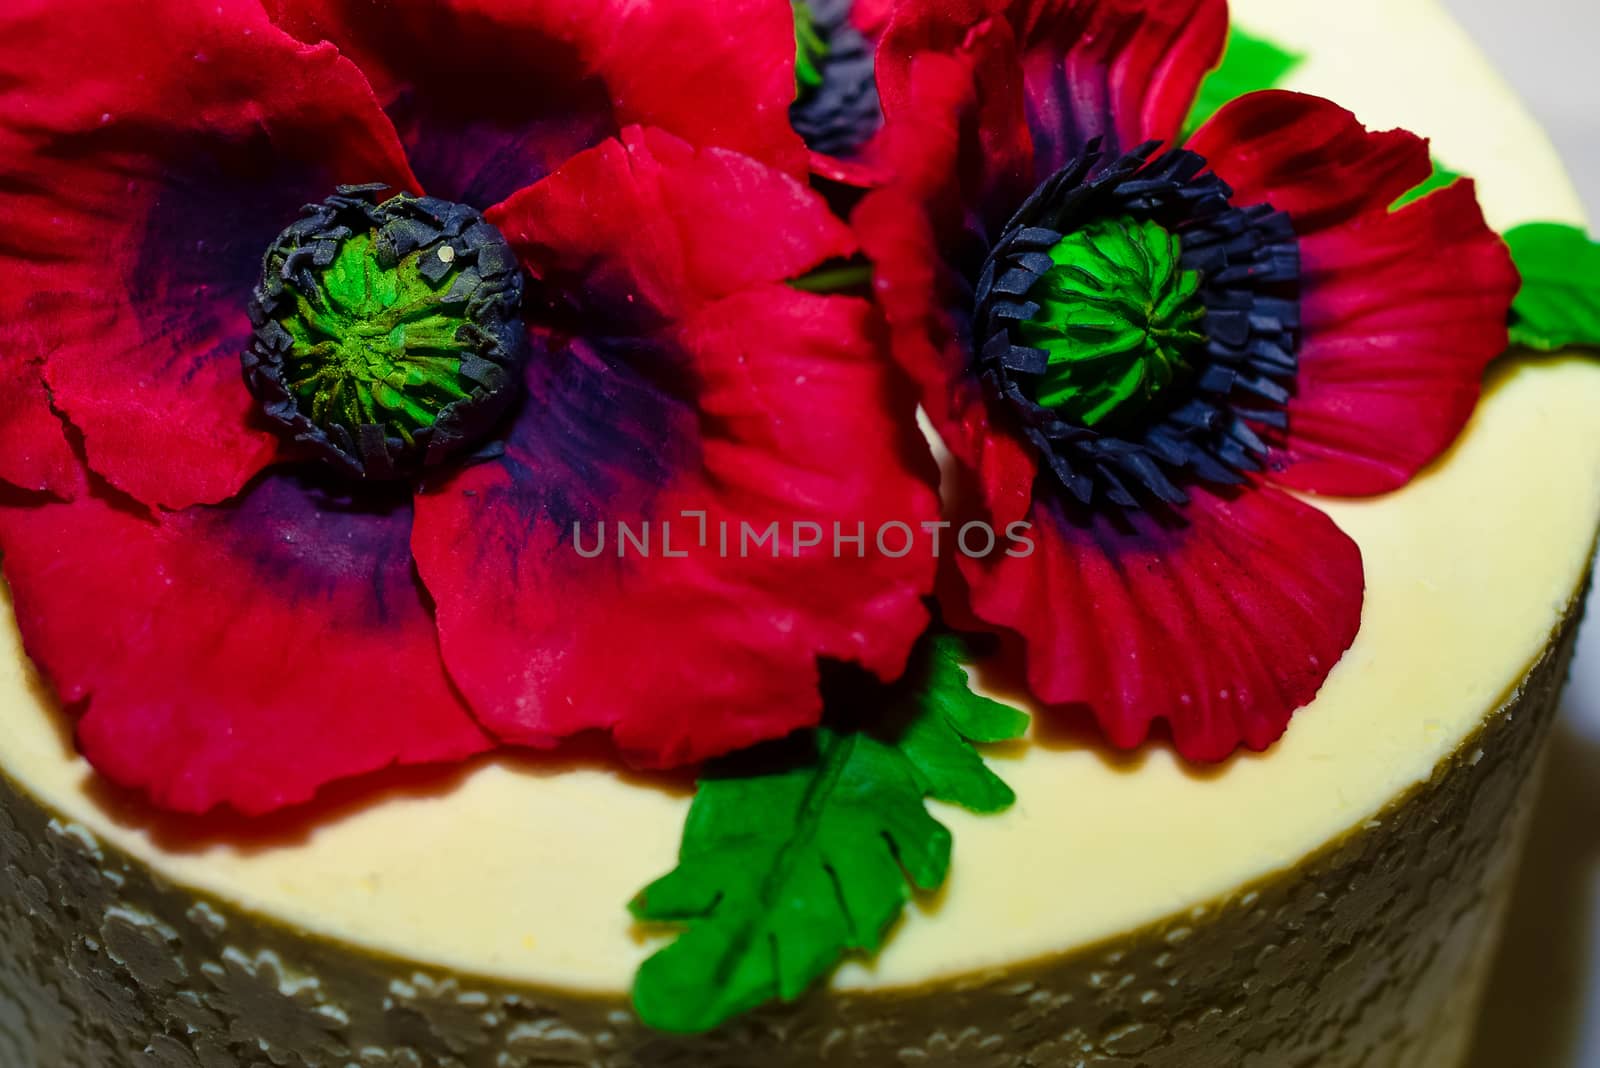 red poppies-white cake decoration by alexandr_sorokin